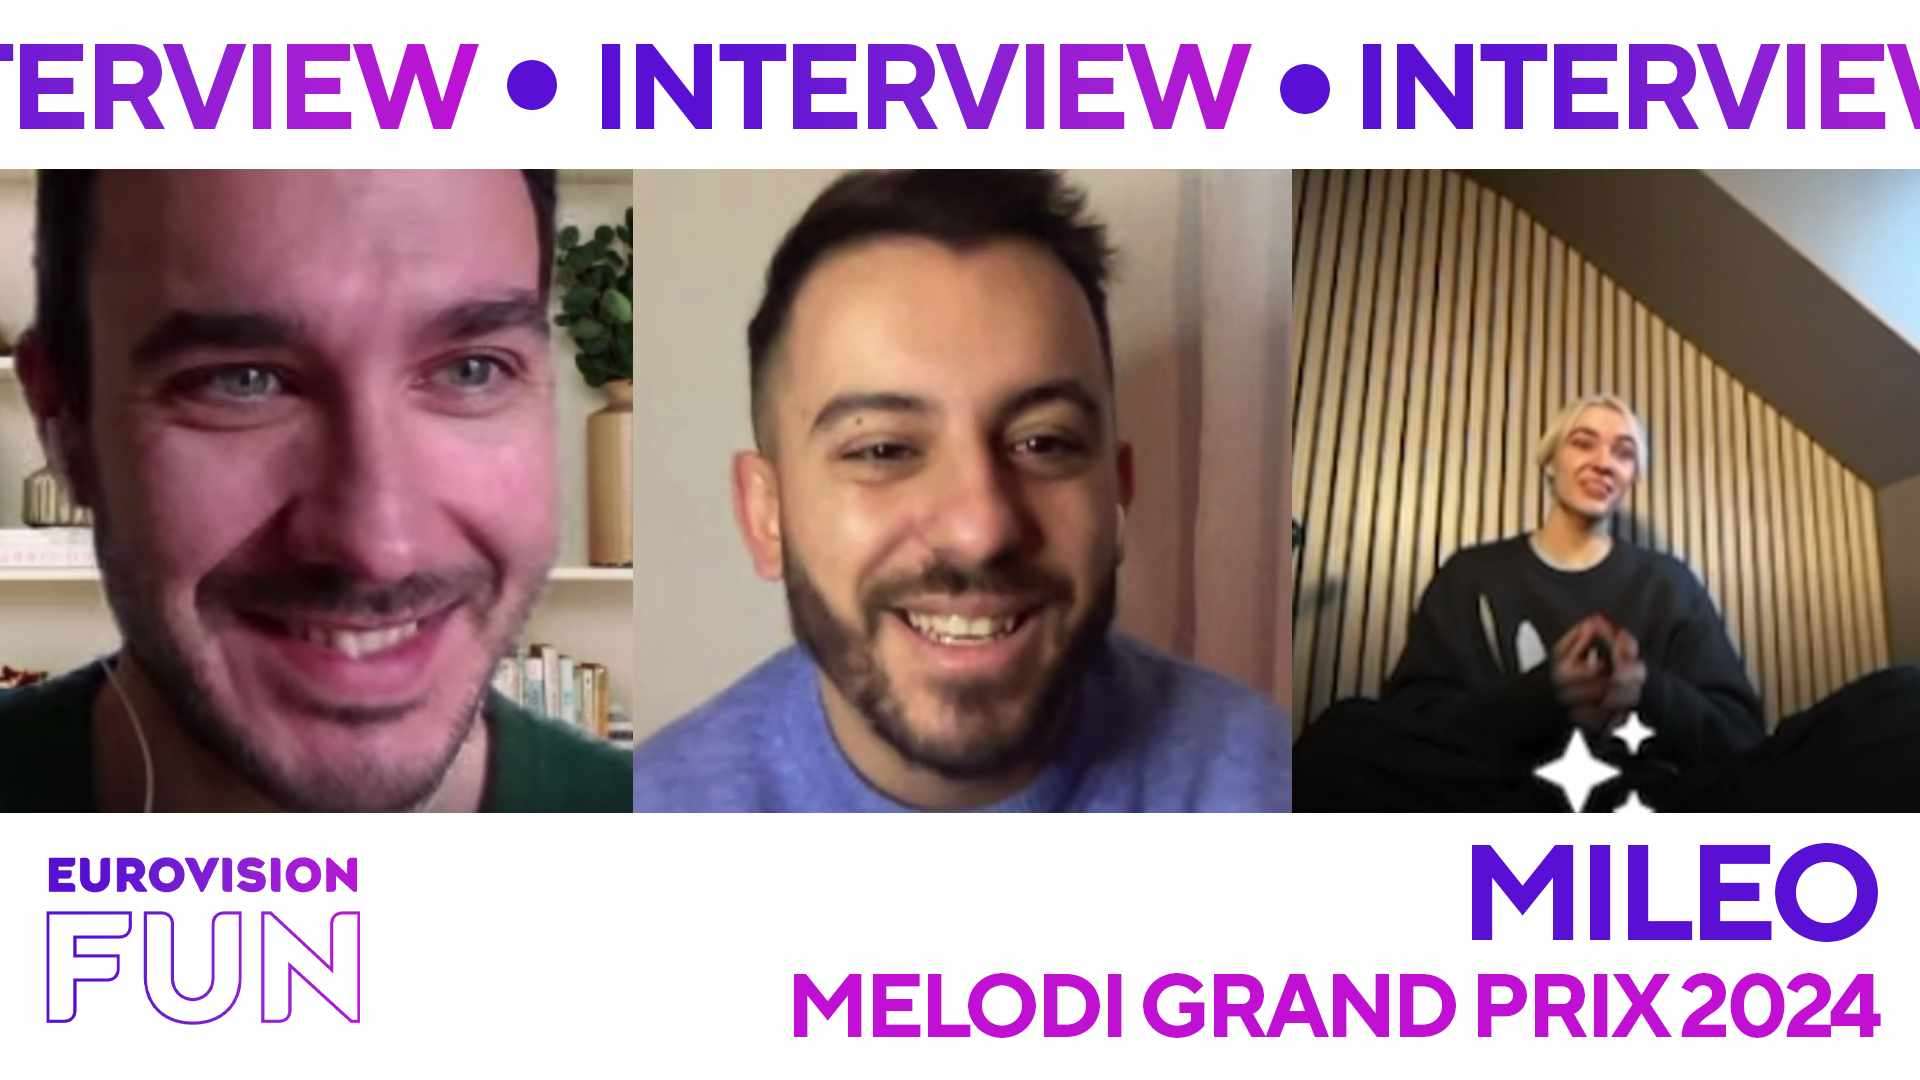 Mileo: I watch the contest every year! | Interview - Eurovision News ...